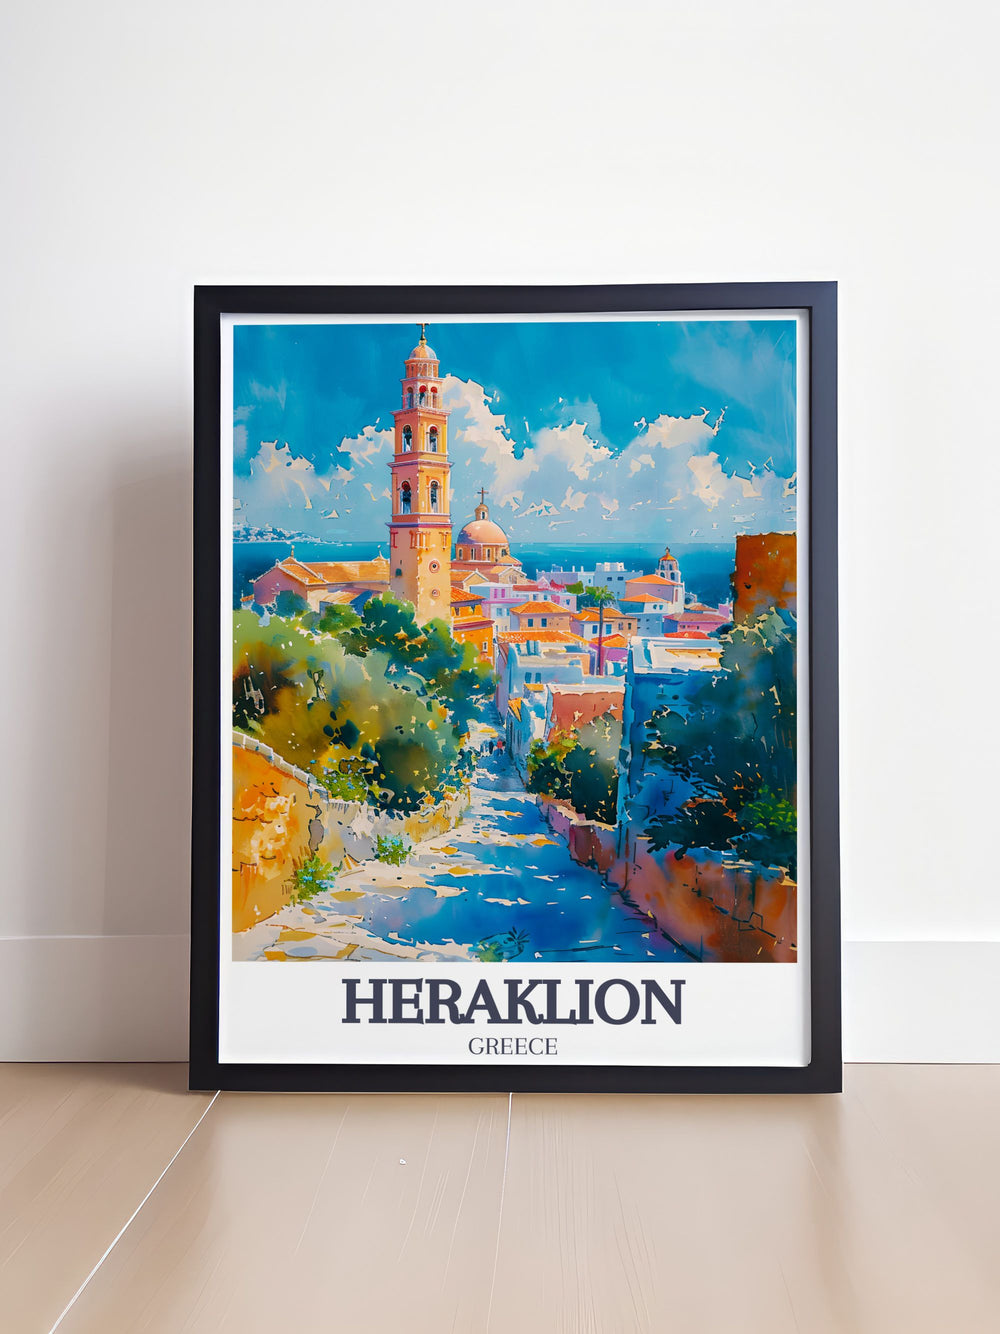 Home decor print showcasing the majestic Agios Minas Cathedral in Heraklion, Crete, Greece. The artwork highlights the cathedrals grand facade, detailed interior, and vibrant surroundings, bringing the essence of Greek religious and cultural heritage into your home.